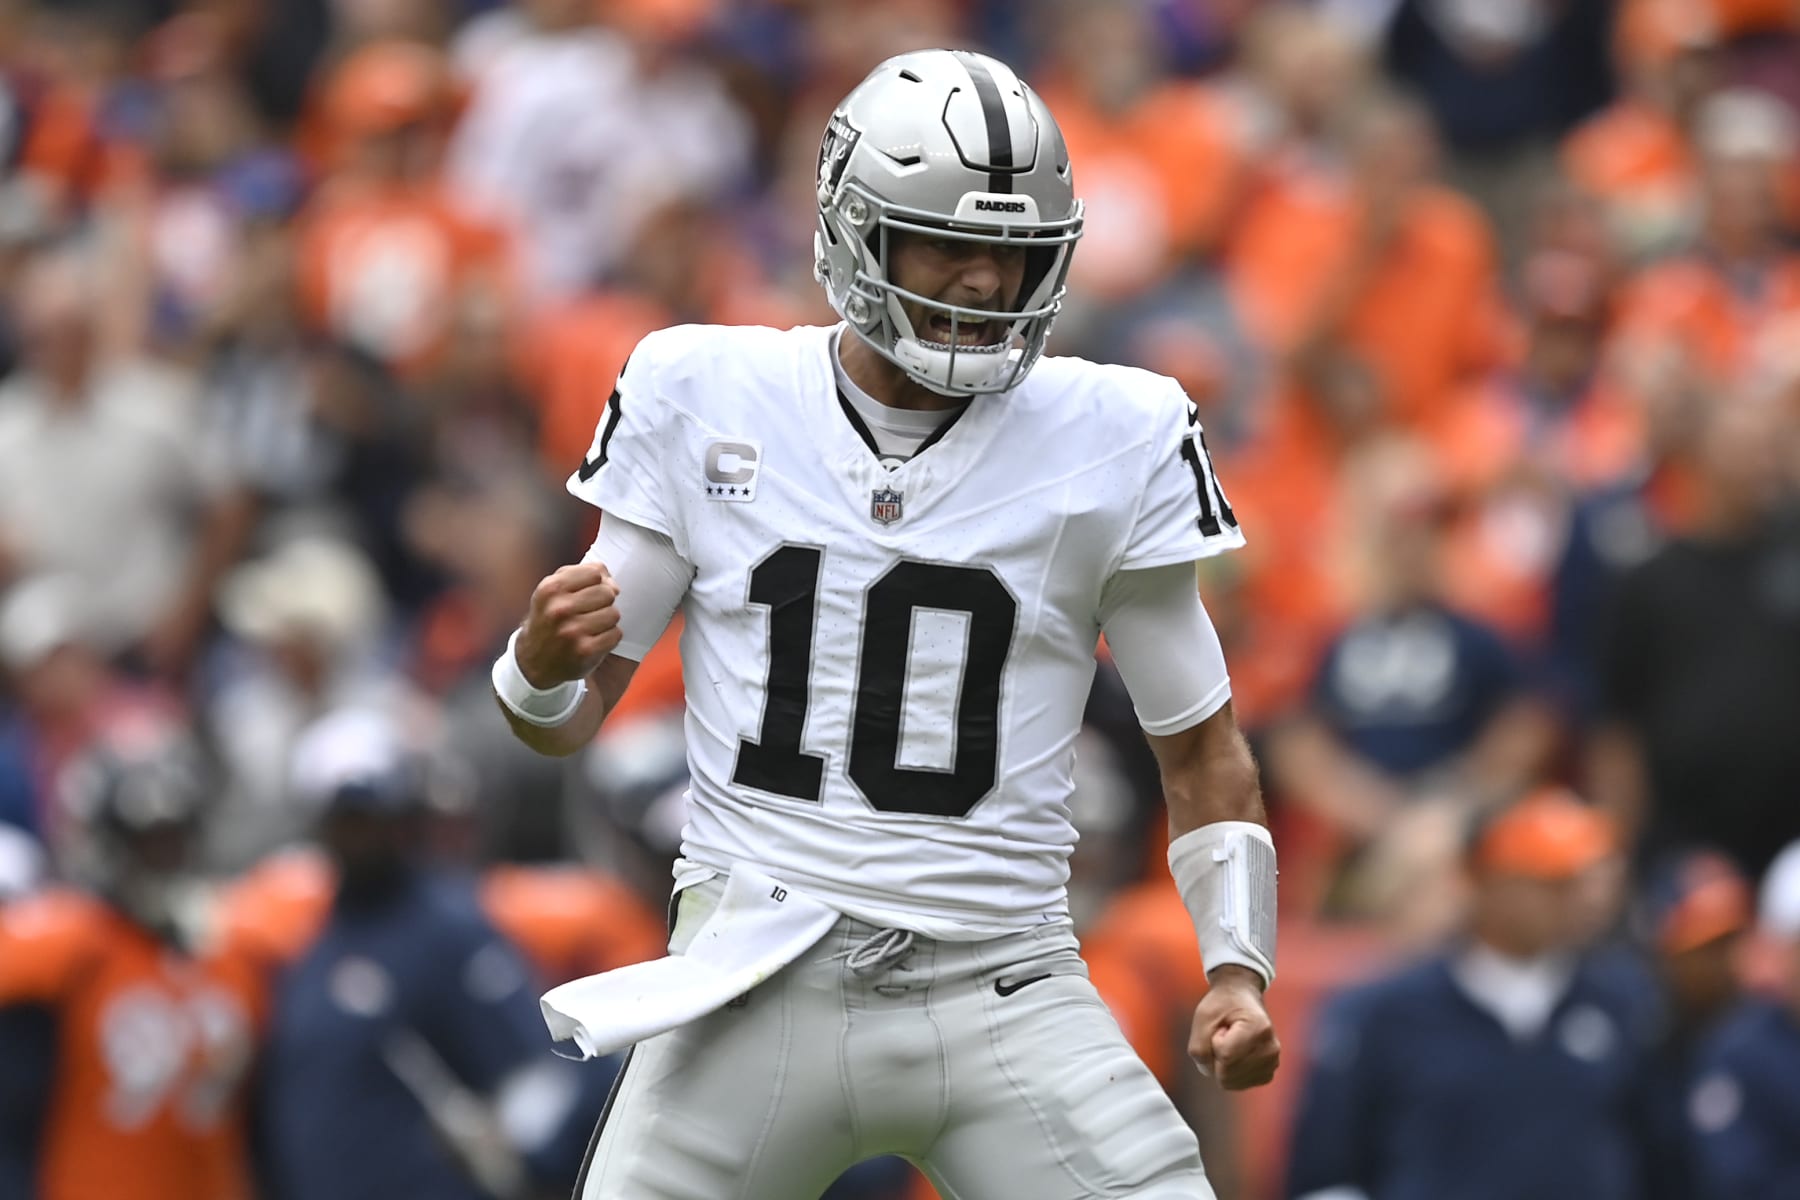 Broncos vs. Raiders: Live updates and highlights from the NFL Week 1 game